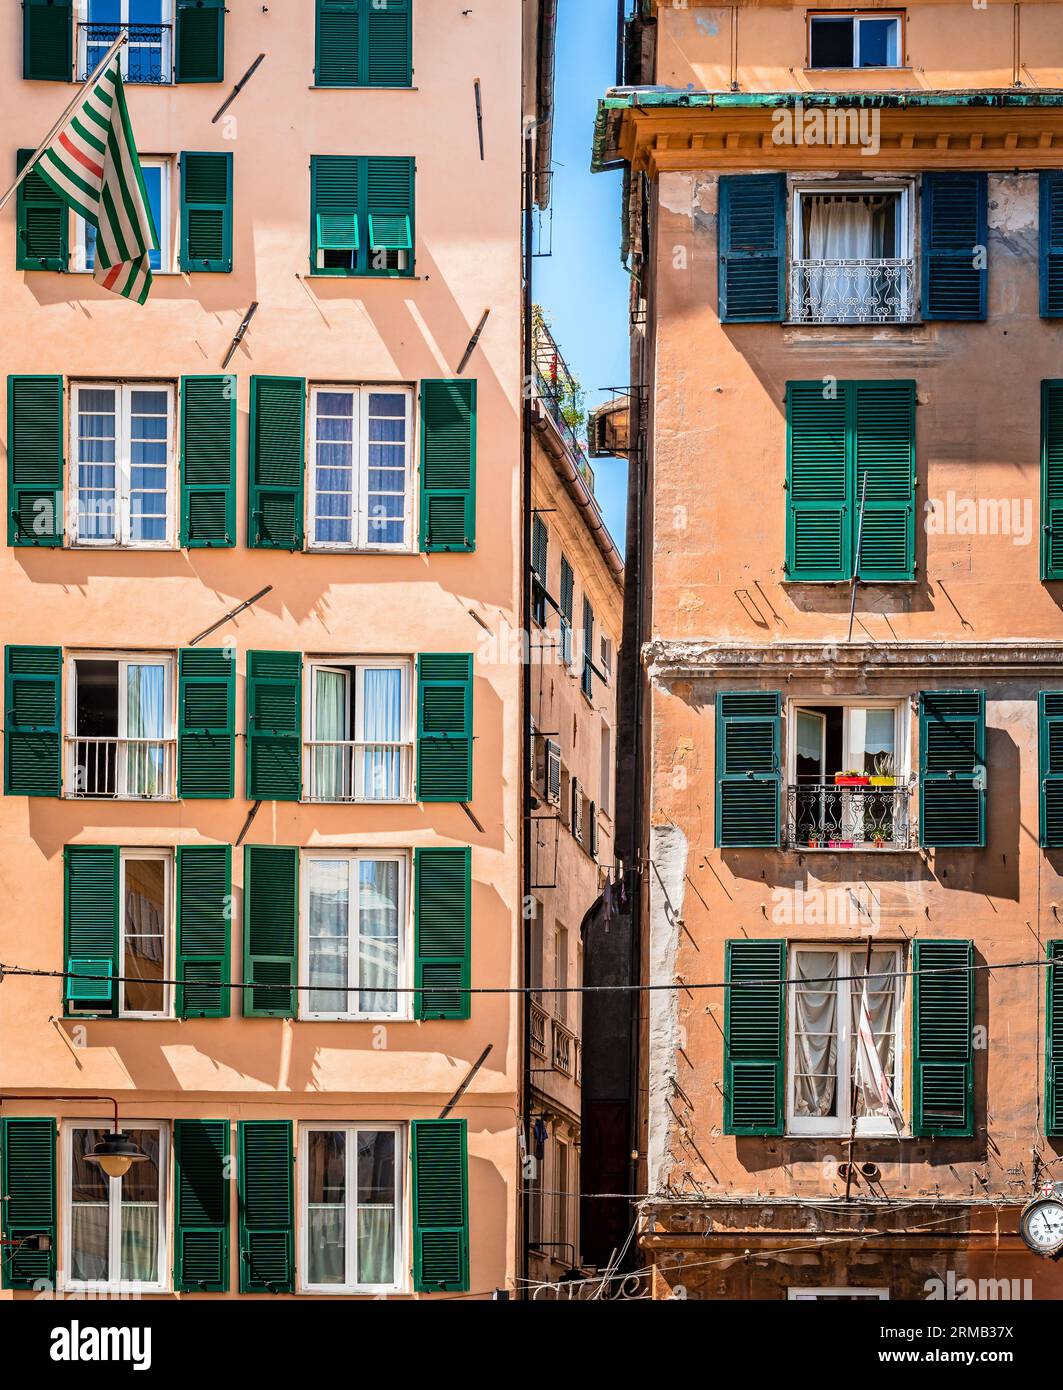 Facades of two similar residential building in Genoa downtown, Italy. A renovated one on the left and an old one on the right. Stock Photo